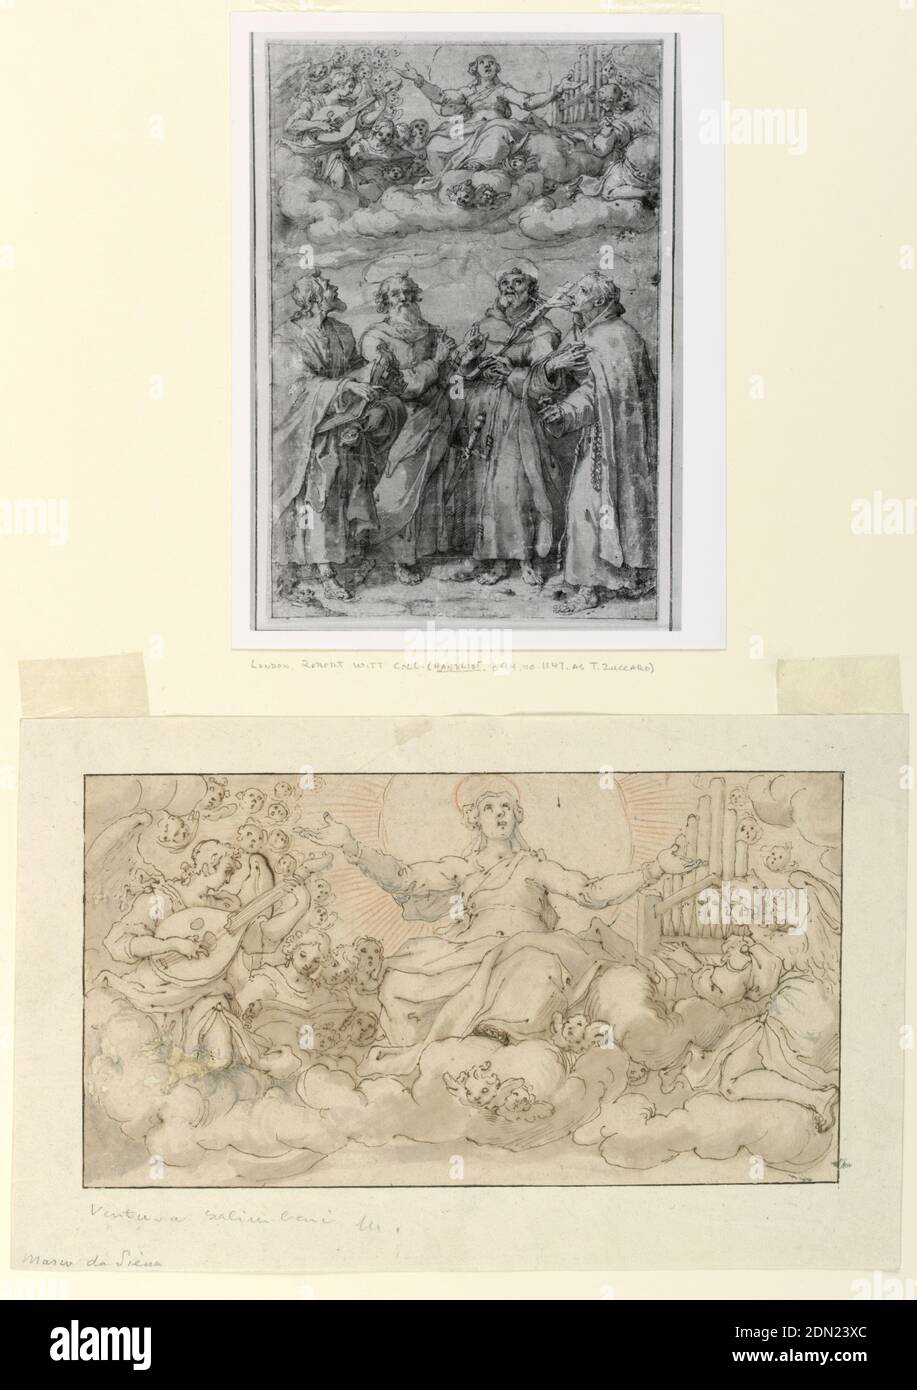 The Assumption of the Virgin, Ventura Salimbeni, Italian, 1568 - before 1613, Taddeo Zuccaro, Italian, 1529 - 1566, Red crayon, pen and ink, brush and gray wash, and sepia on paper, Horizontal rectangle. Upon Clouds. In the center is the Virgin, in a glory of rays. At left is an angel playing the lute. At right another one playing the organ; both with groups of angels. Cherubim below. Compare with drawing by [sp?] reproduced in Röhrer 'Sammlung H.S Röhrer,' Augsburg, 1928, pl. 103. Salimbeni attribution considered wrong by Philip Pouncy (verbally, March, 1958)., Italy, early 17th century Stock Photo